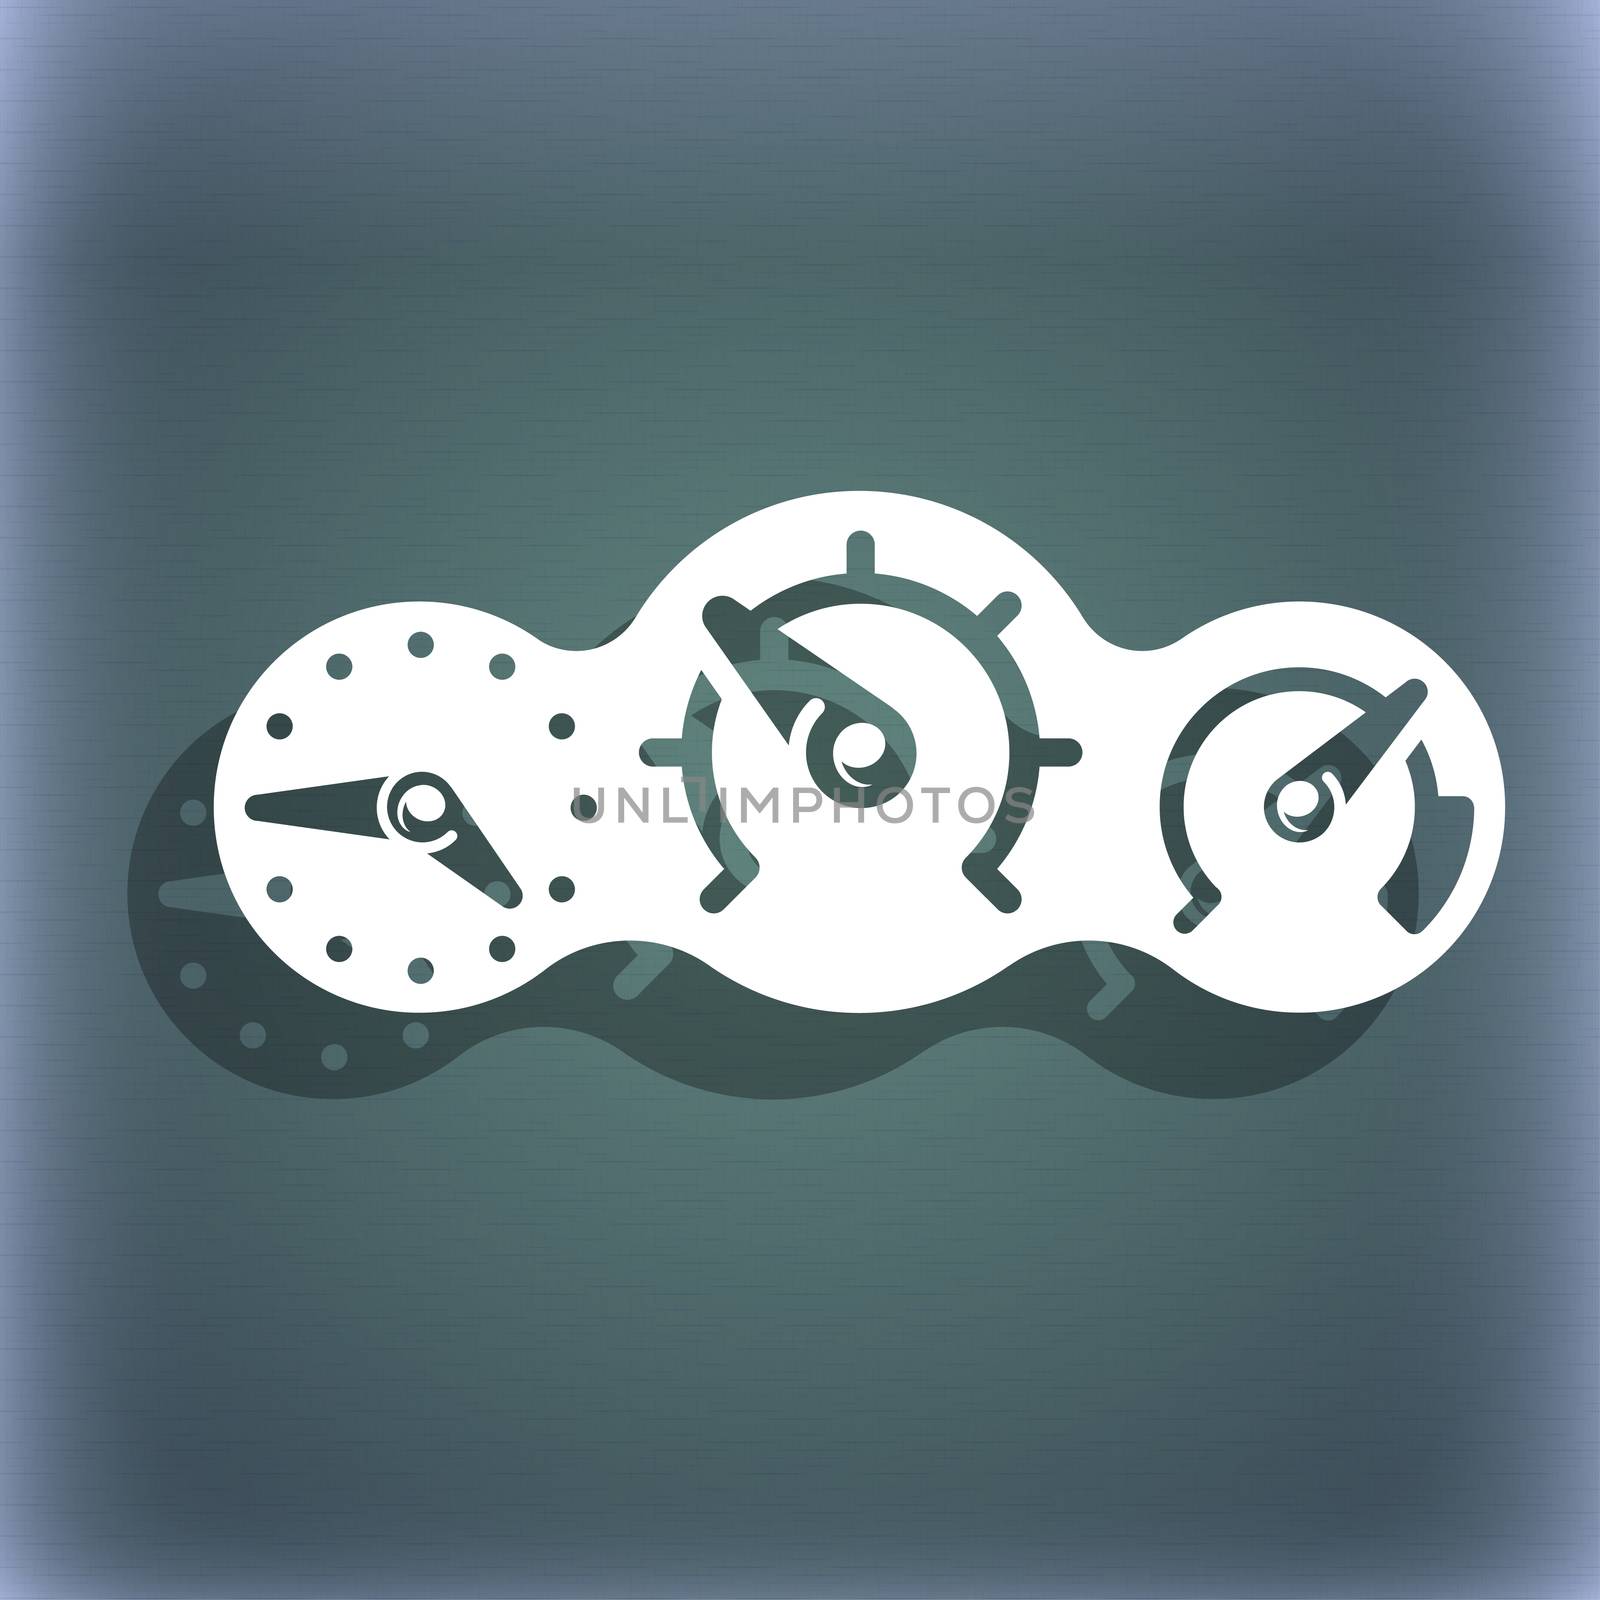 speed, speedometer icon symbol on the blue-green abstract background with shadow and space for your text. illustration